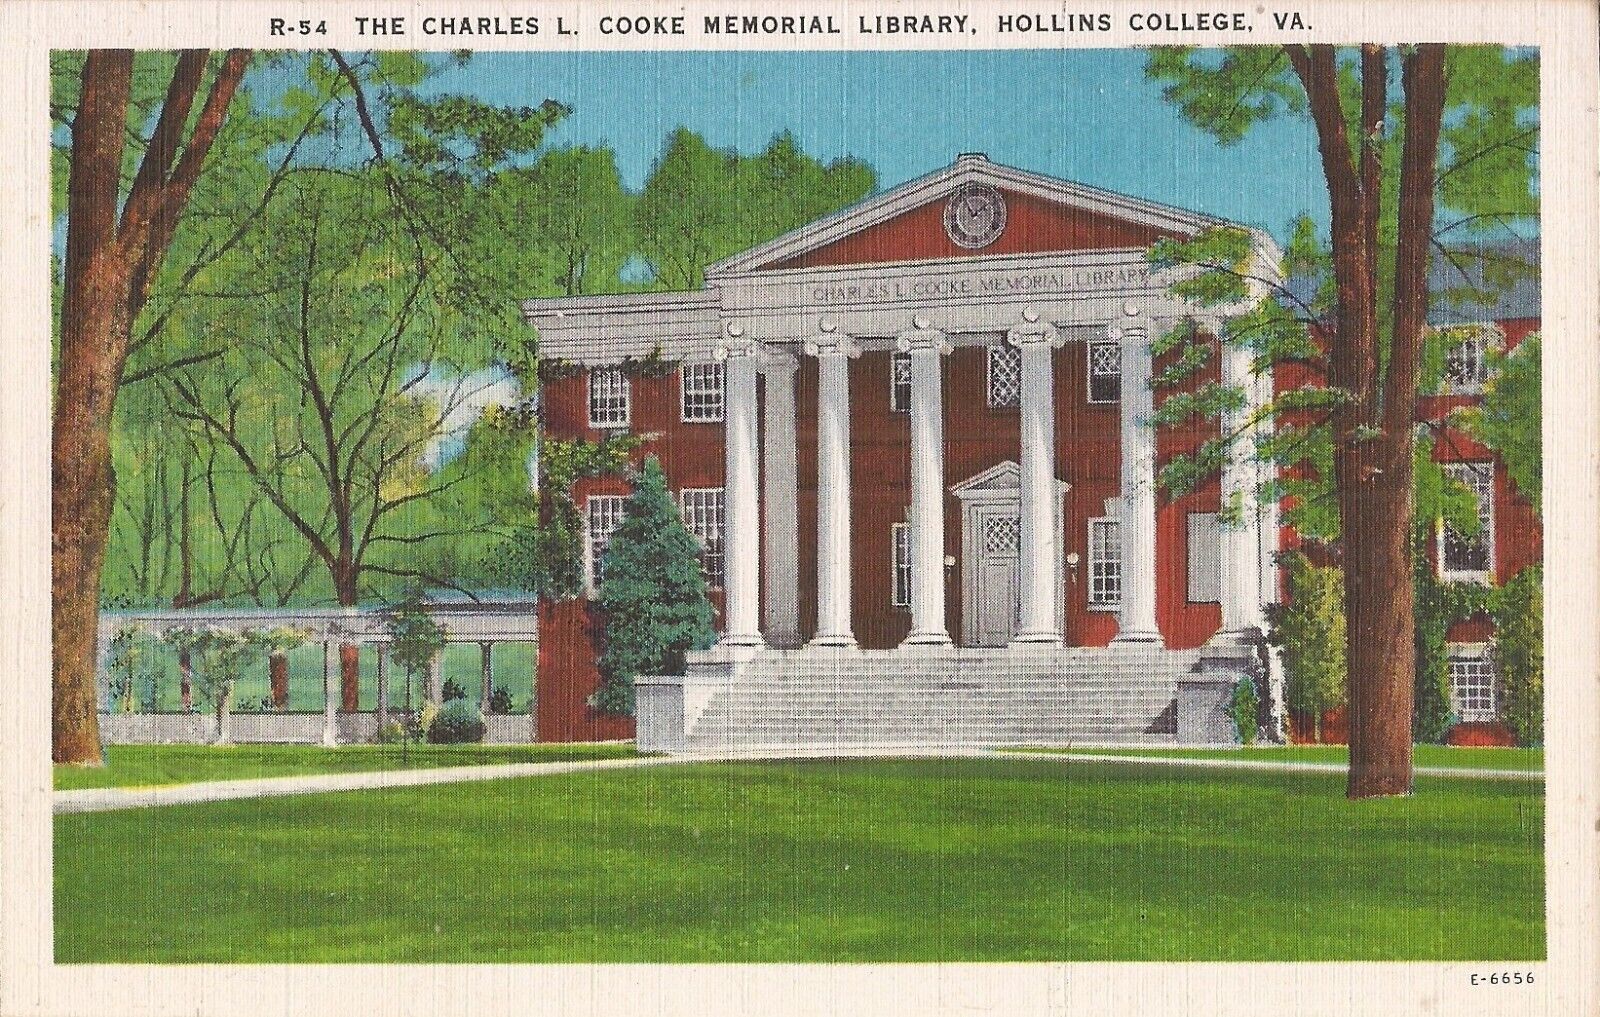 Hollins College, VIRGINIA - Charles L. Cooke Memorial Library - Women's College